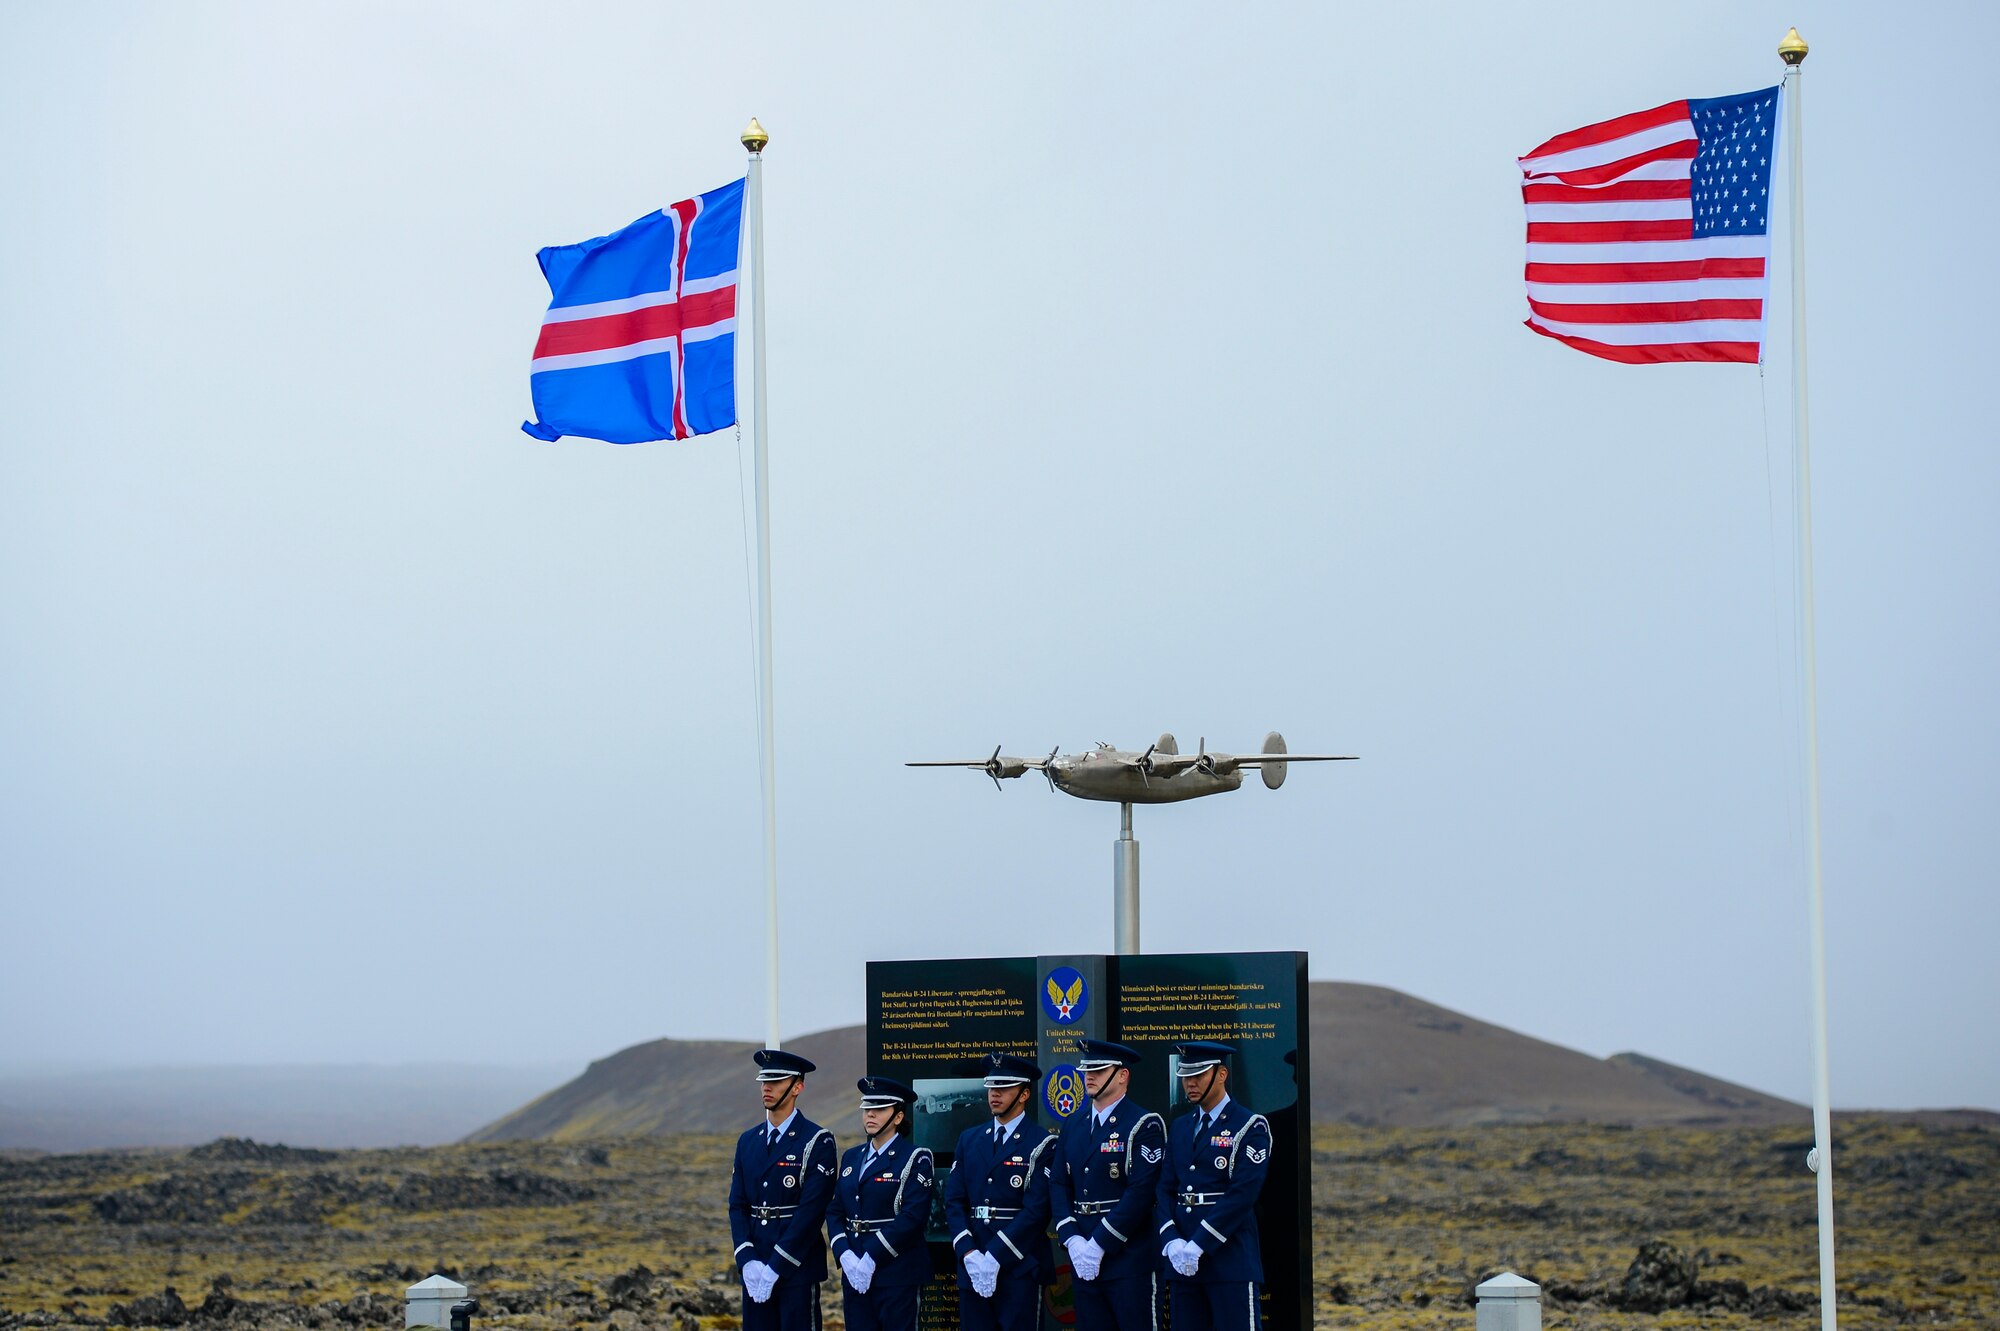 Airmen assigned to the Spangdahlem Air Base Honor Guard pose for a photo in front of a monument dedicaed to Lt. Gen. Frank Maxwell Andrews and his crew, May 3, 2018, in Keflavic, Iceland. The ceremony recognized the 75th anniversary of the crash of a B-24 Liberator which resulted in the death of Andrews and 13 members of his crew. (U.S. Air Force photo/Staff Sgt. Kenny Holston)